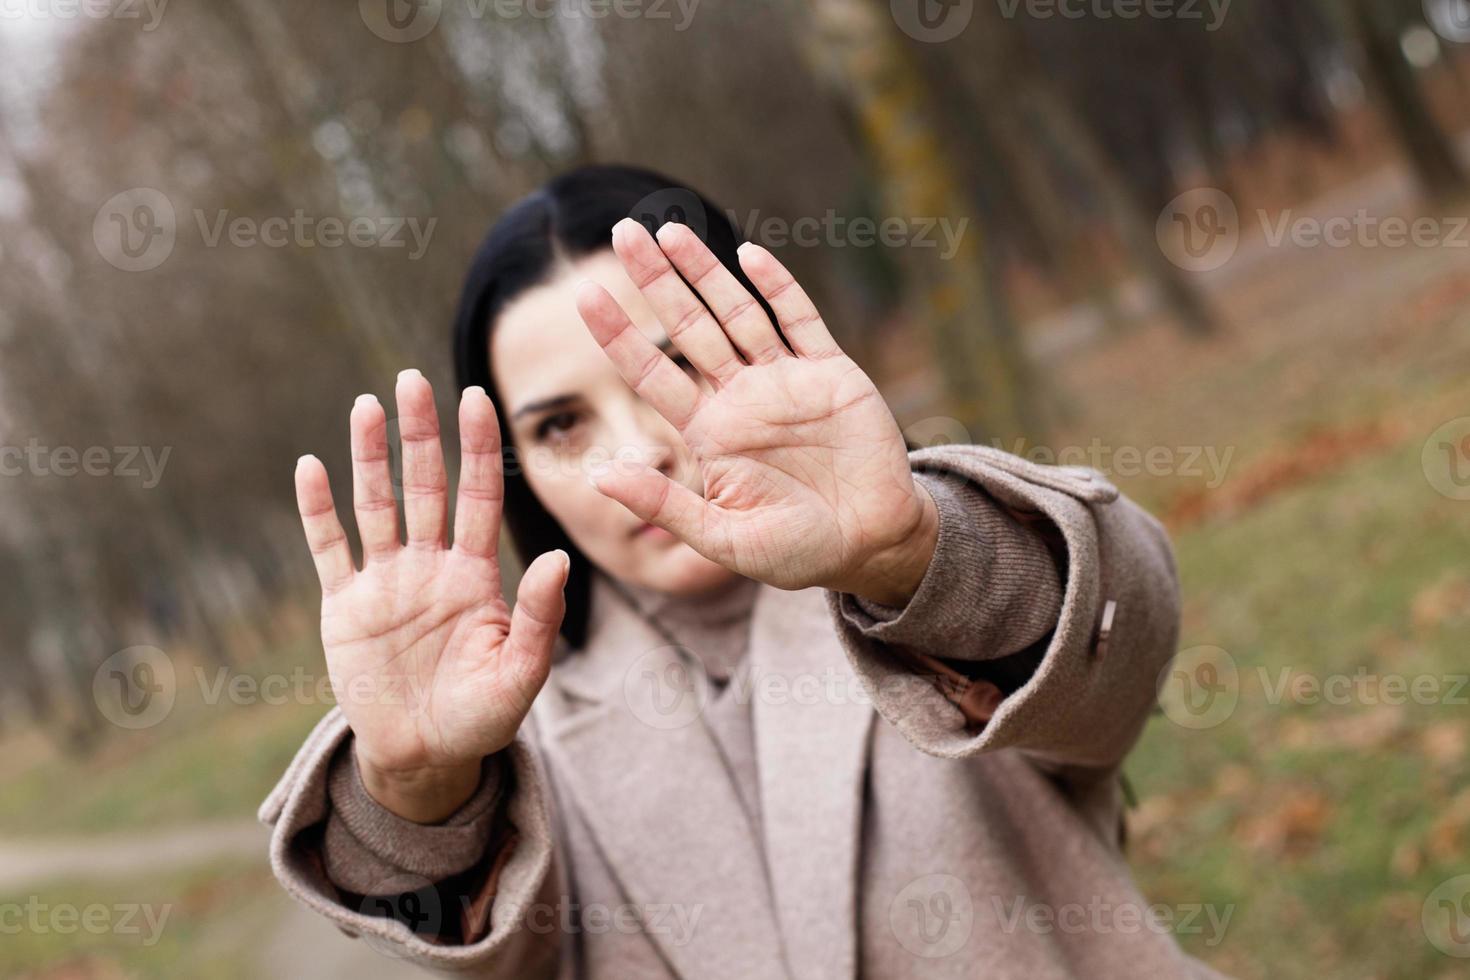 woman stretches her hands with open palms as a stop sign. photo